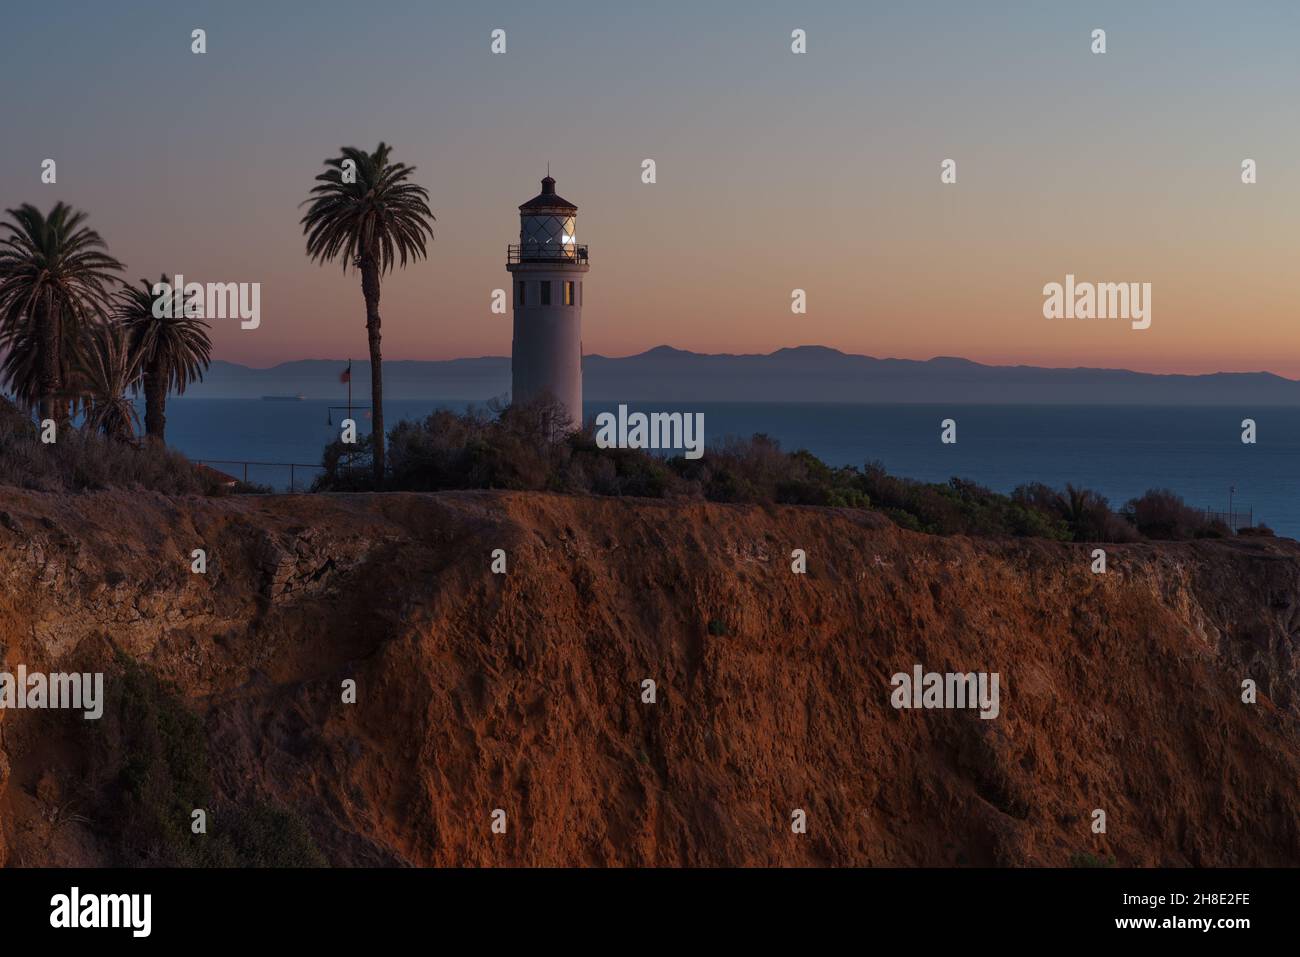 Point Vicente Lighthouse in Rancho Palos Verdes at dusk. The Santa Catalina Island is shown in the background. Stock Photo